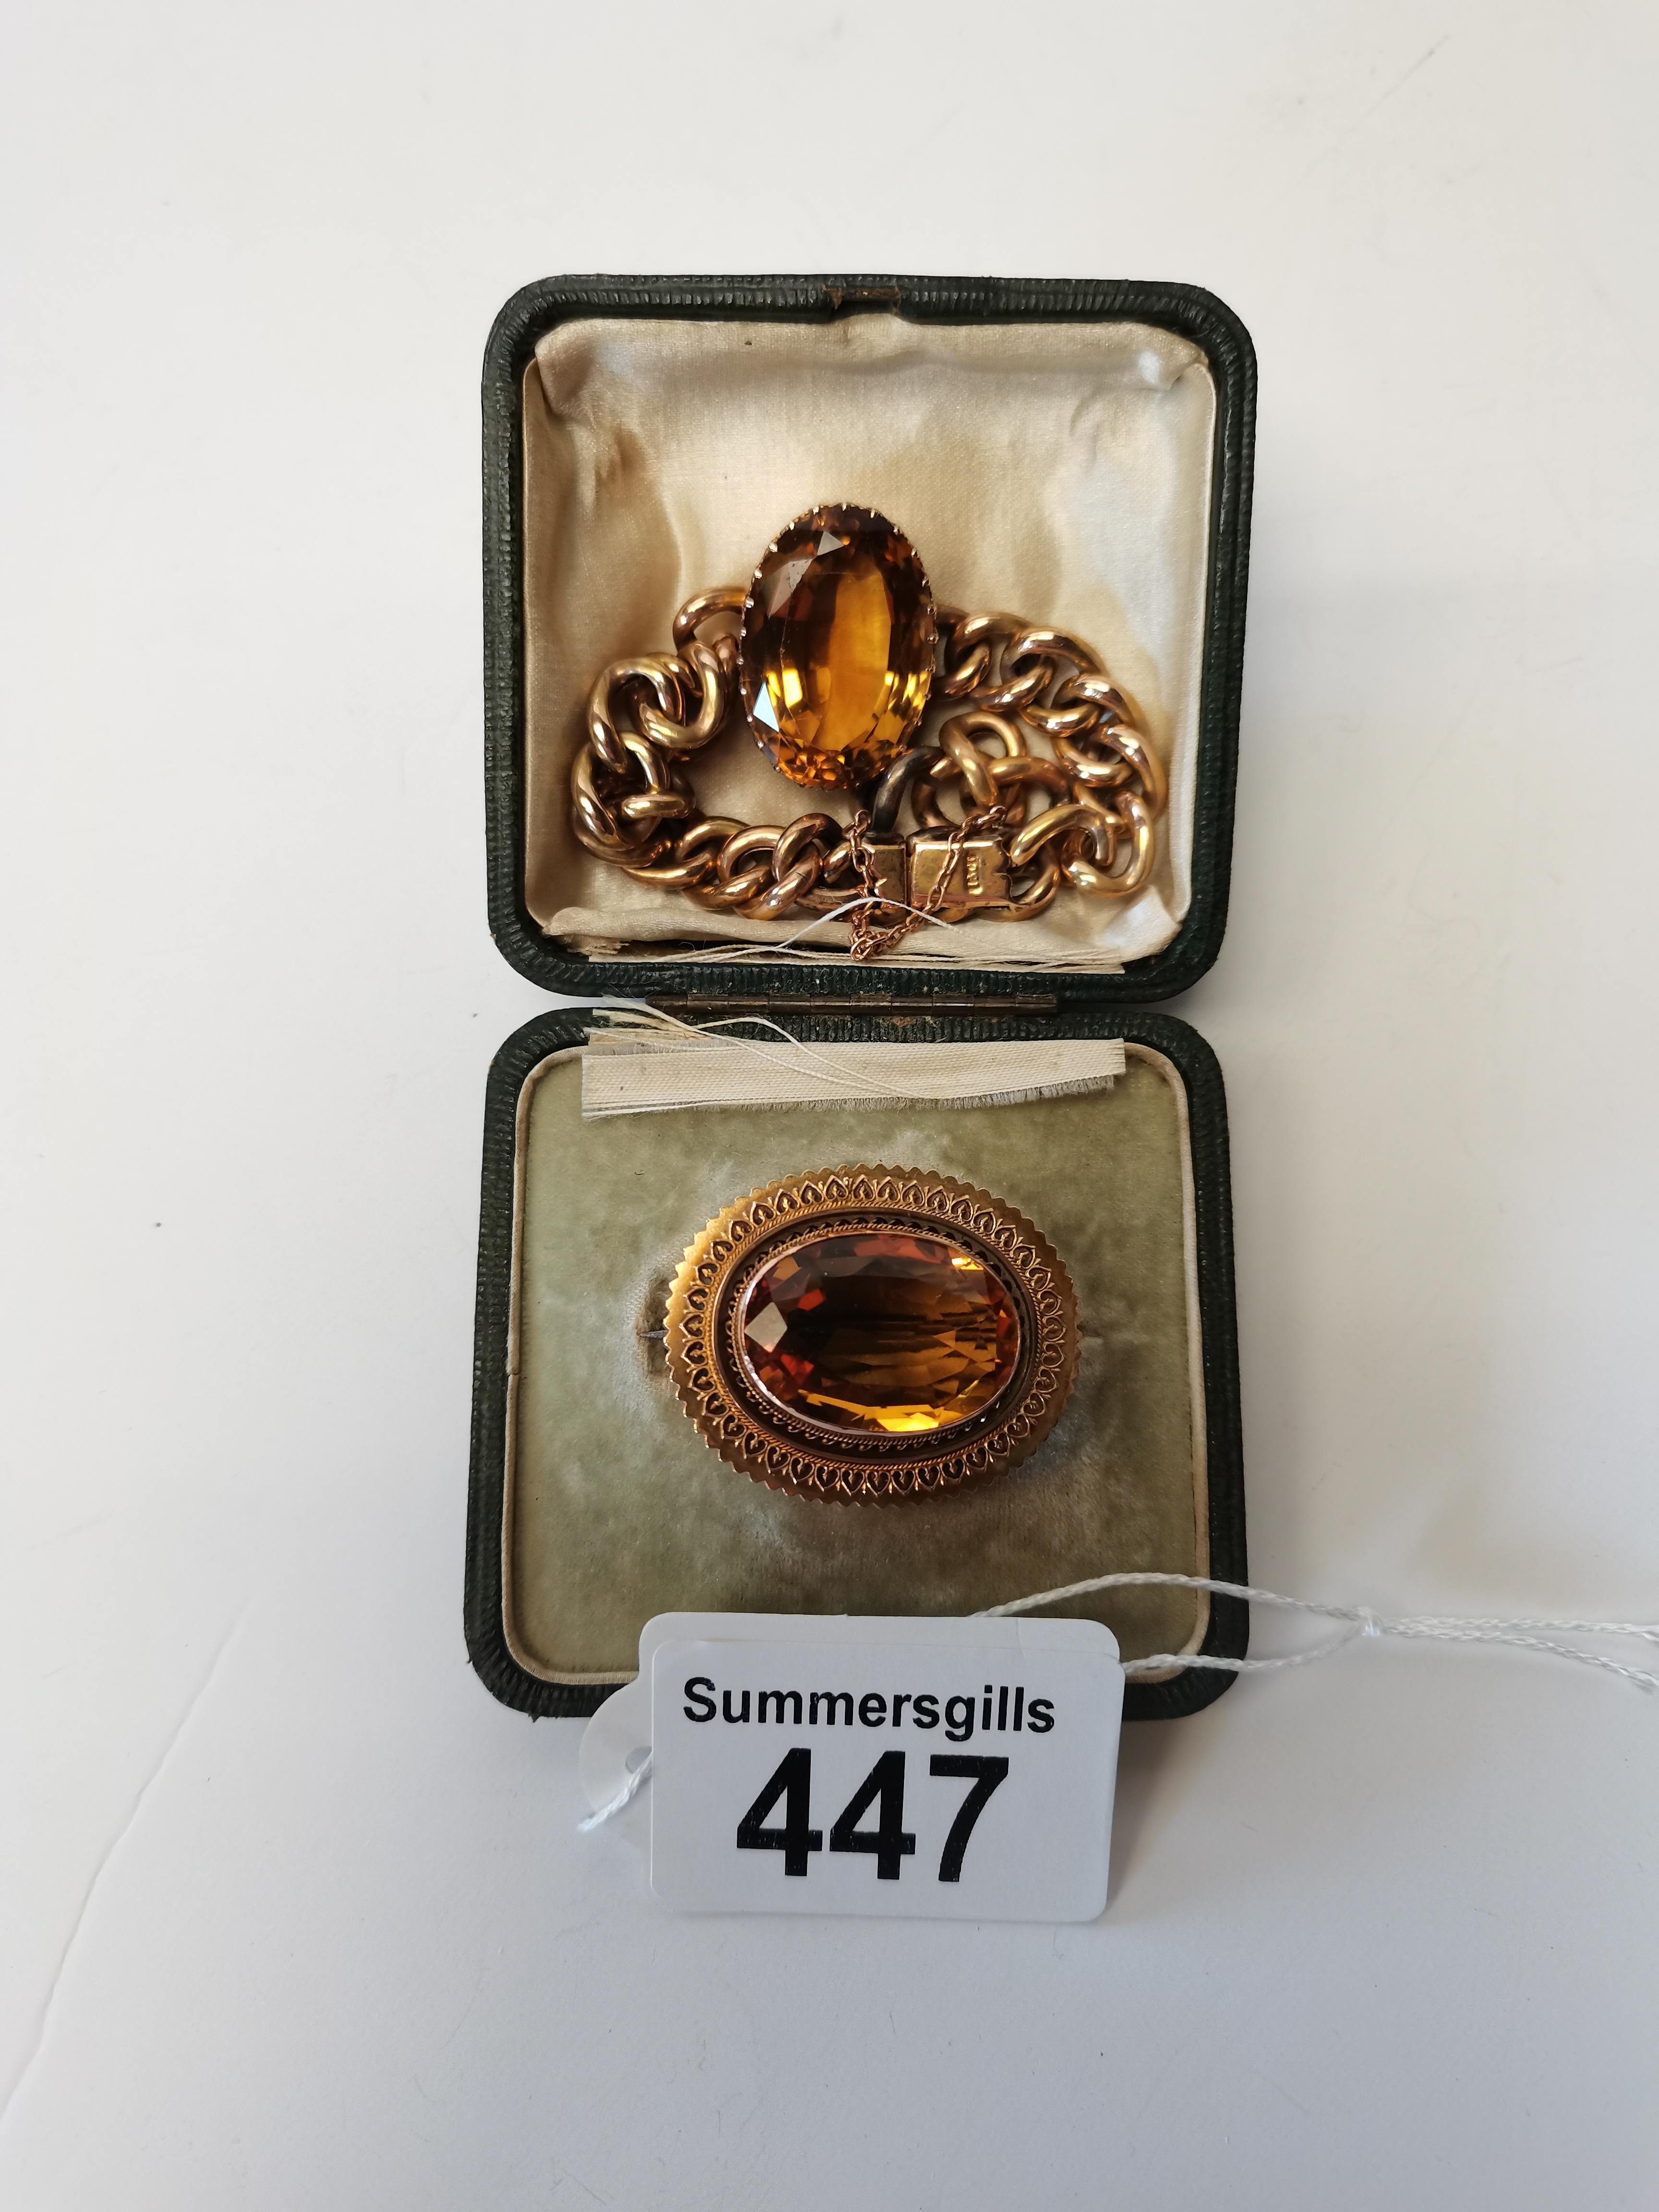 Oval Bracelet with Citrine 30.98 carats and an Oval Brooch with Citrine 16.49 carats